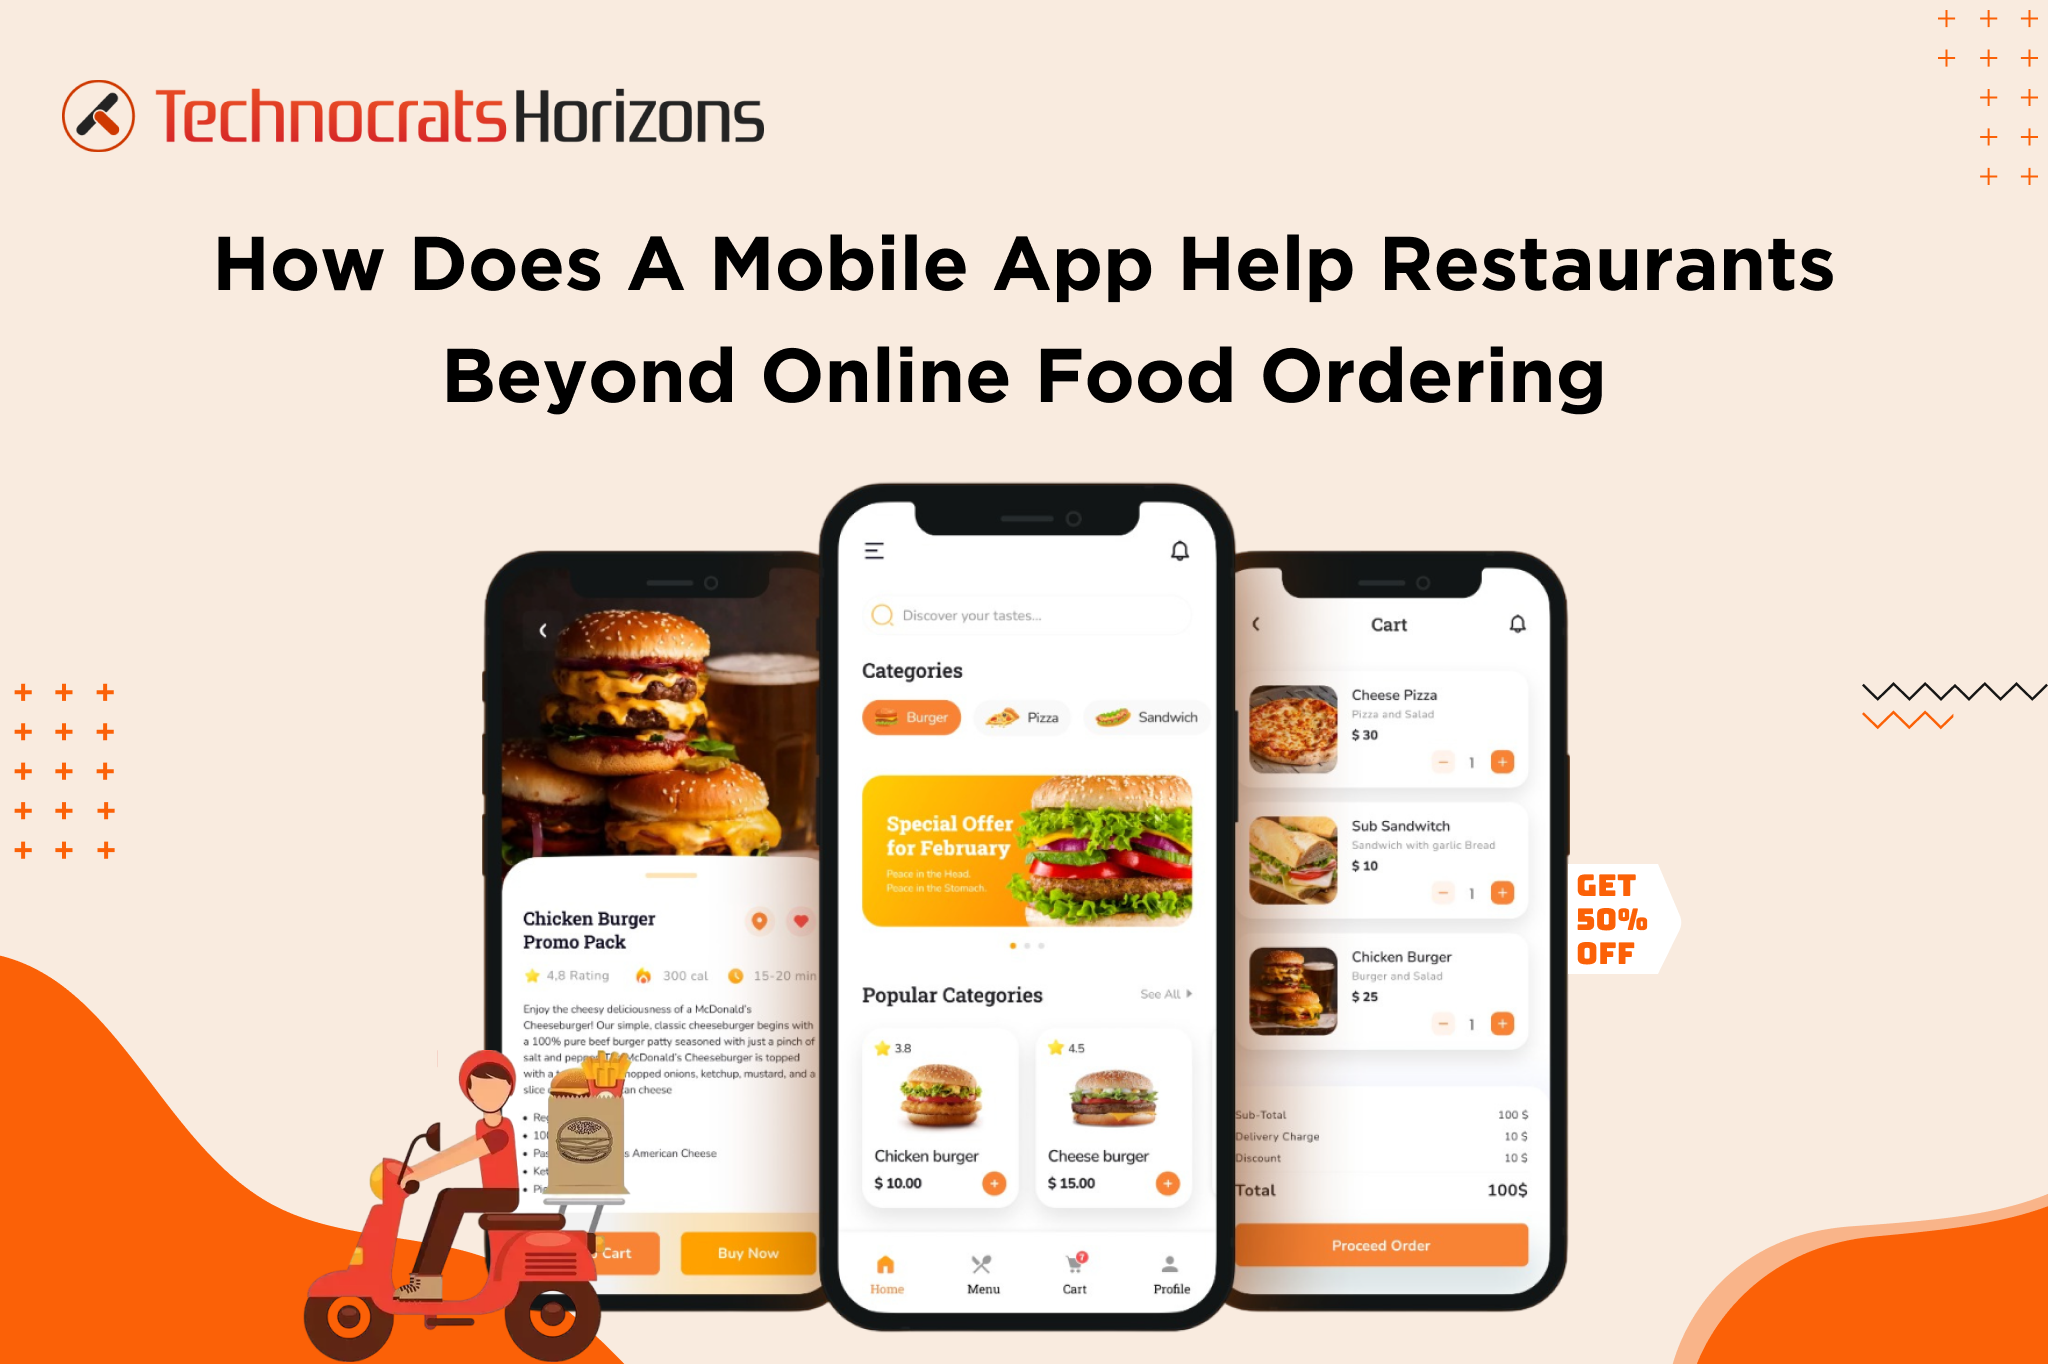 How Do Restaurant Food Delivery Apps Help You Beyond Online Food Ordering